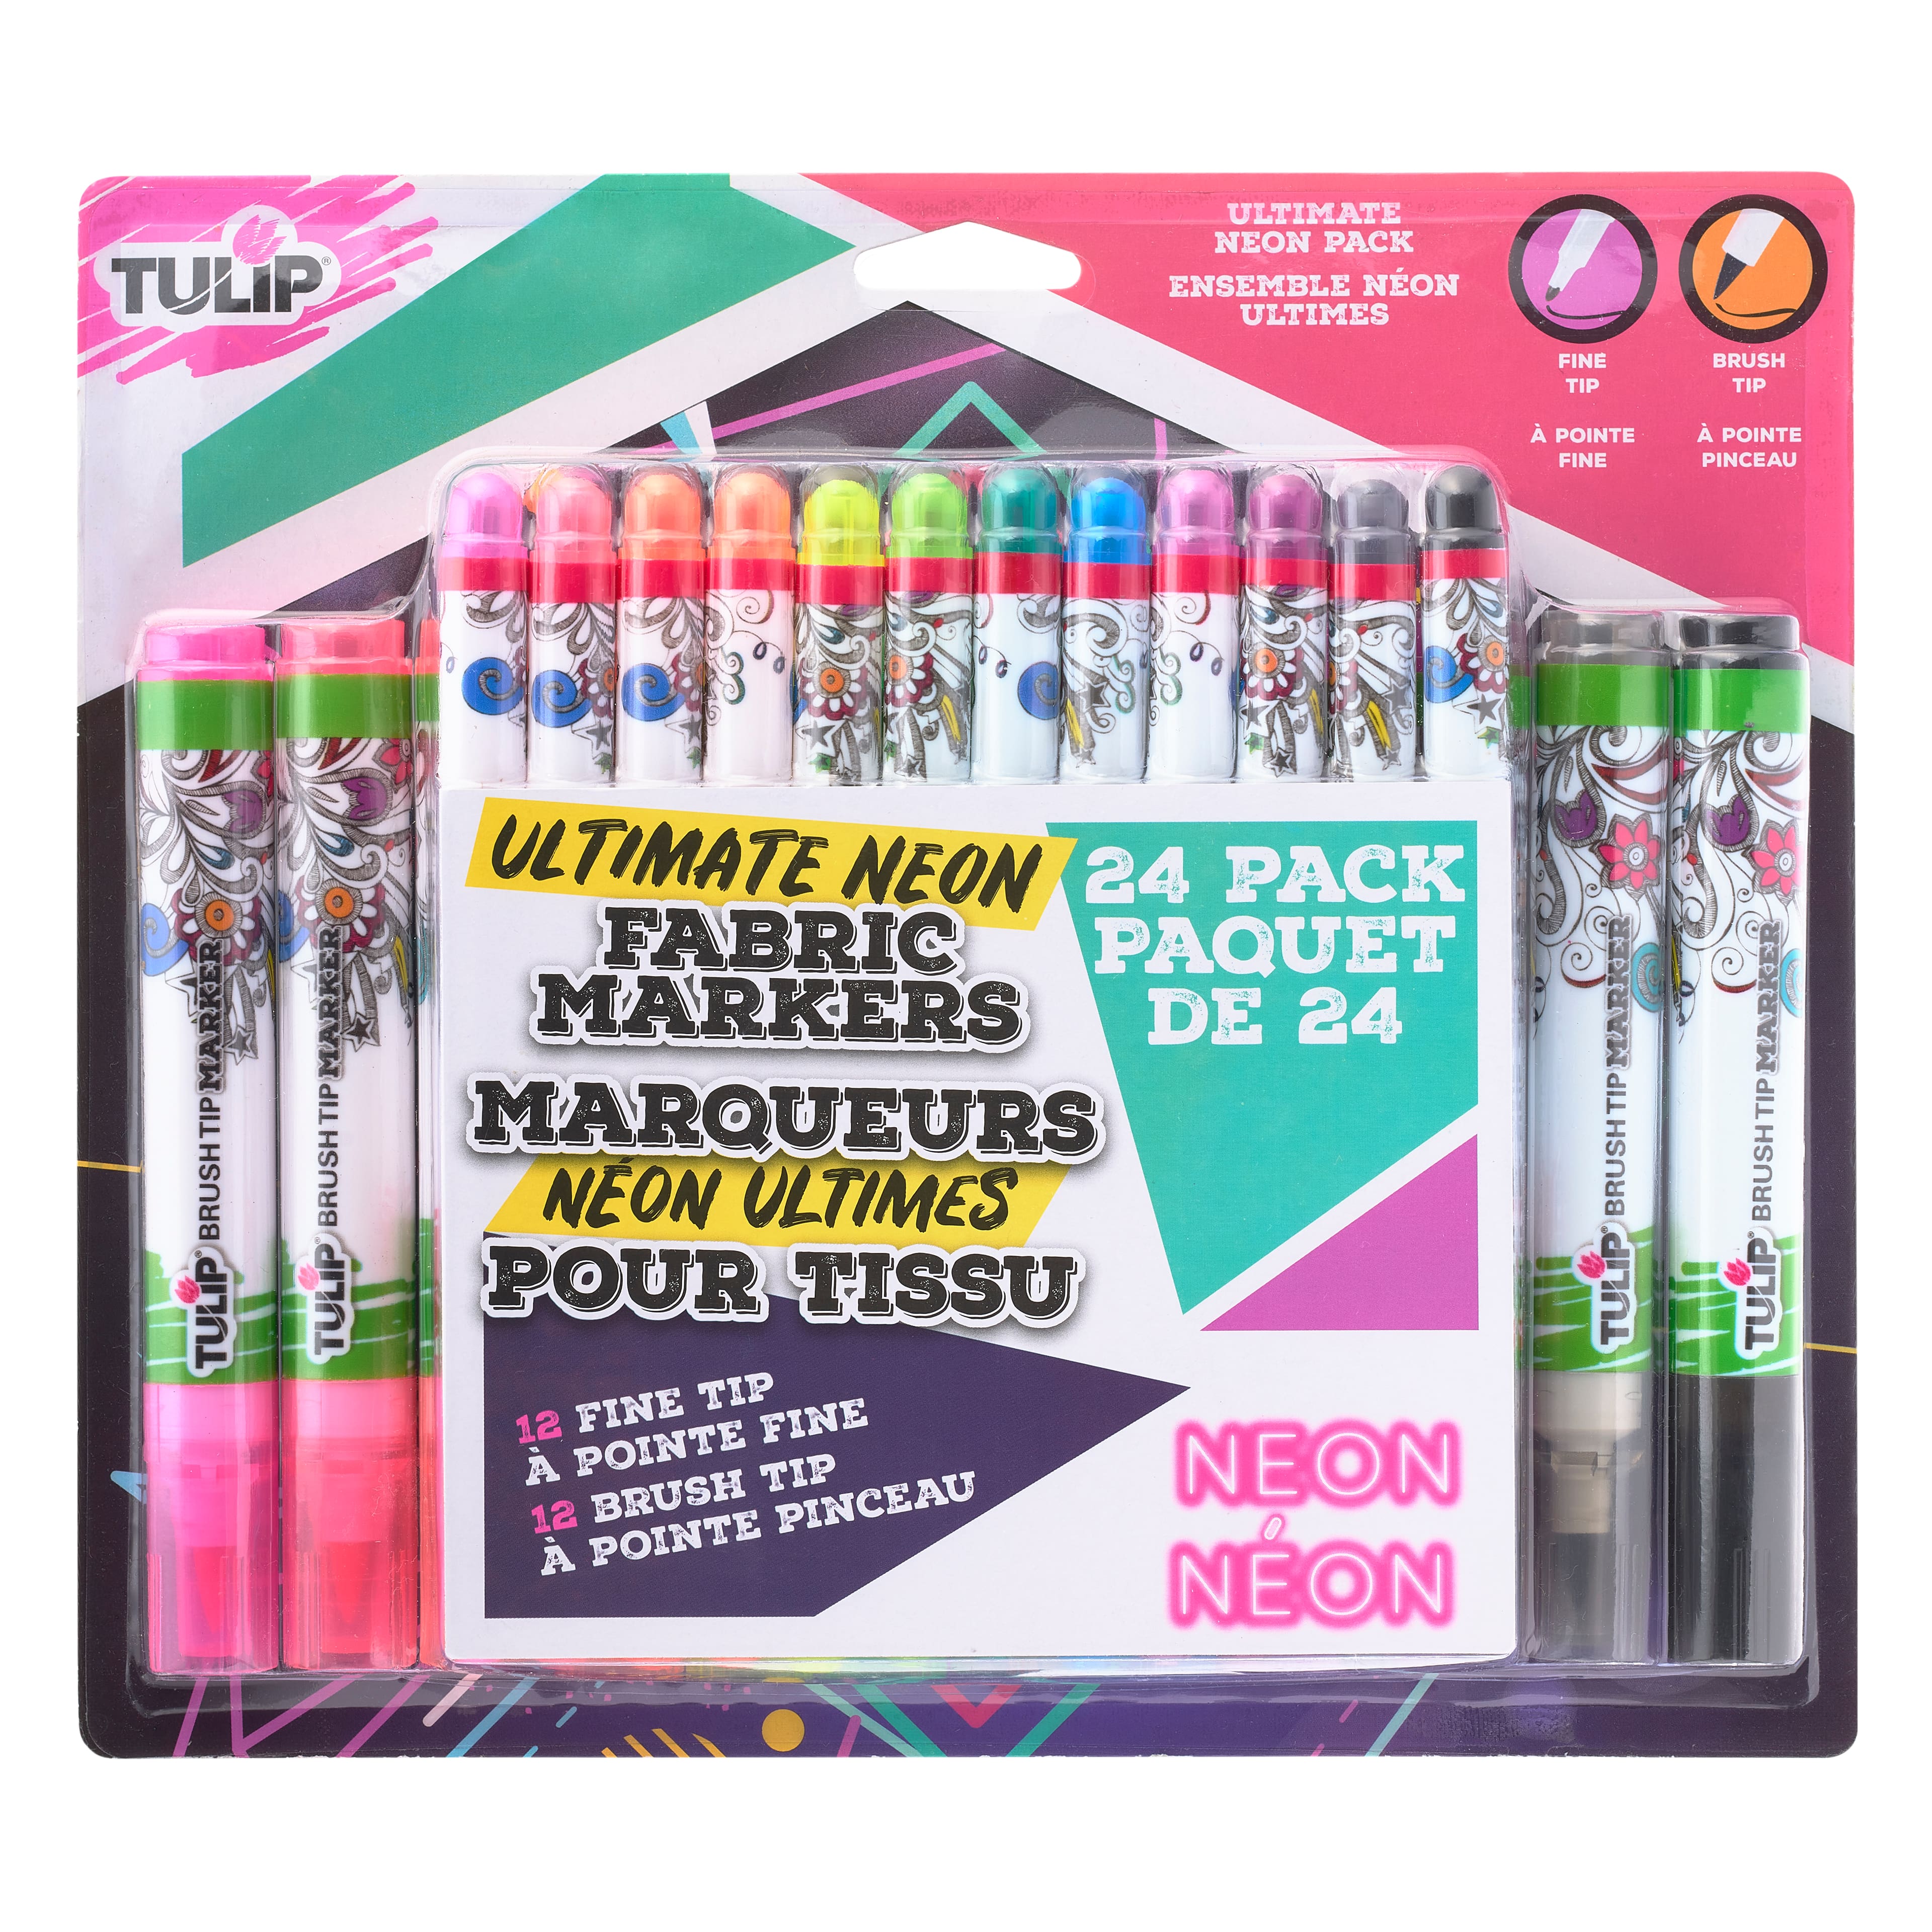 Permanent Fabric Markers - 12 colors in 1 set – MadamSew